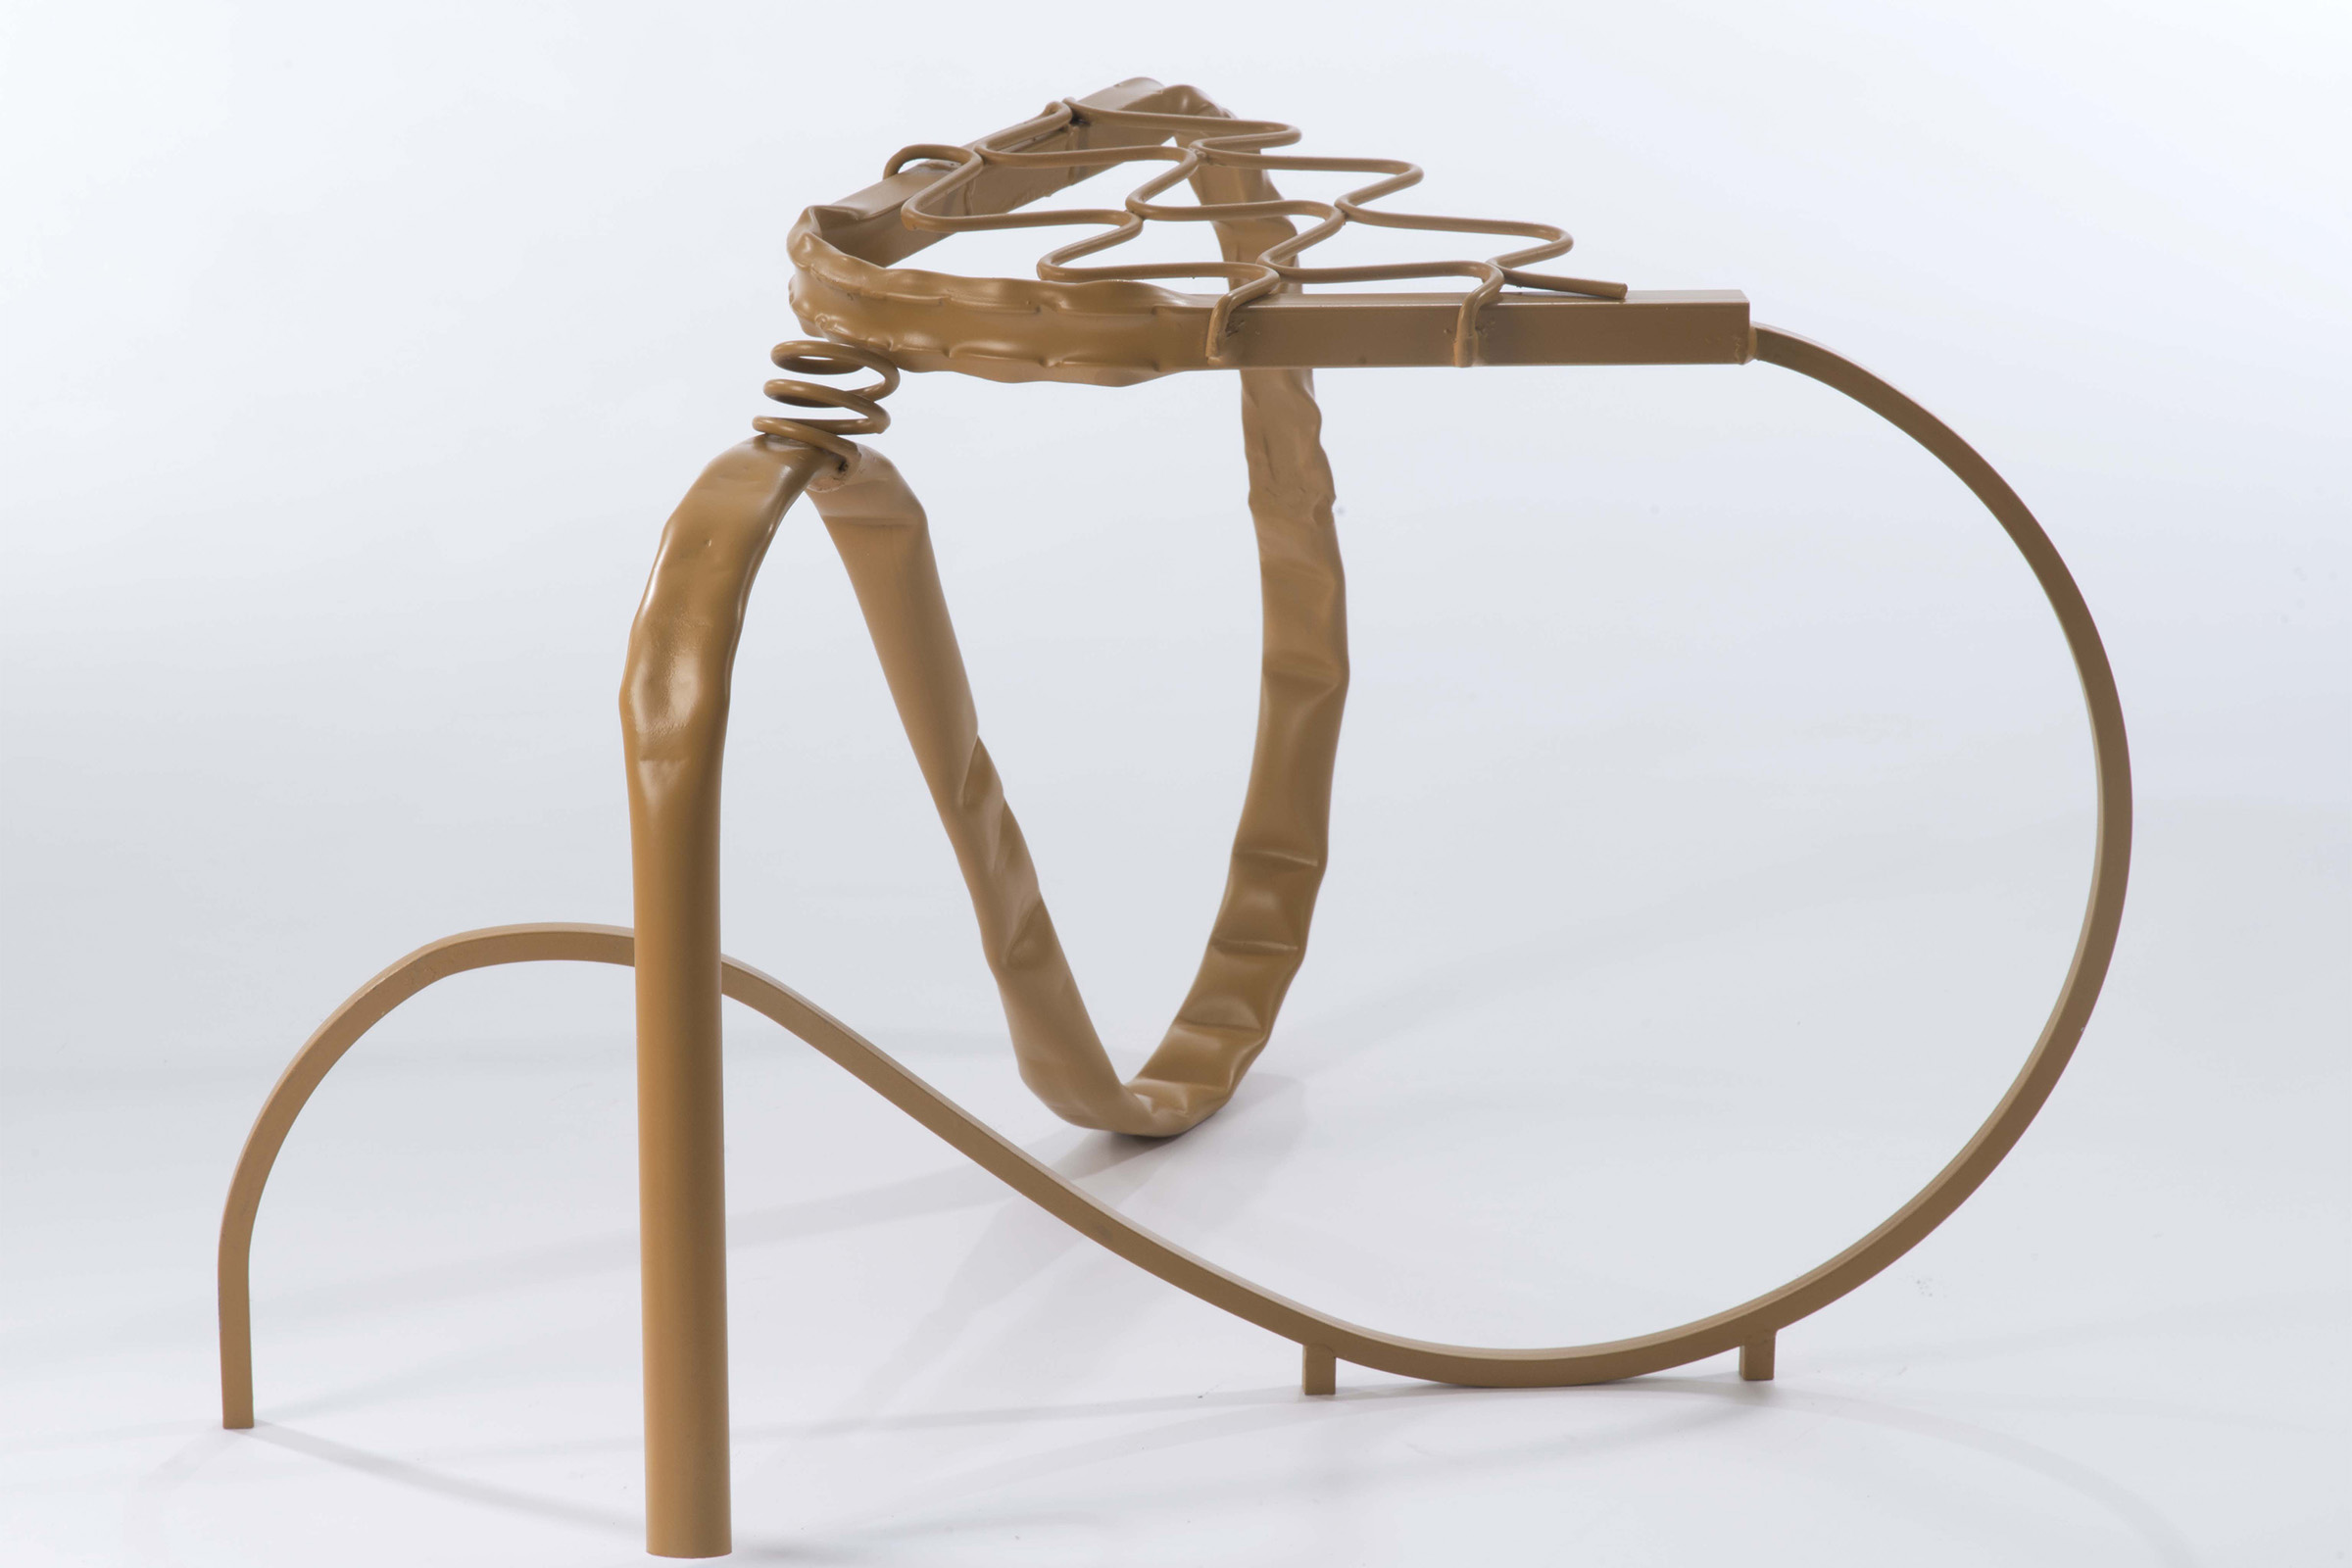 a conceptual chair made of twisted metal